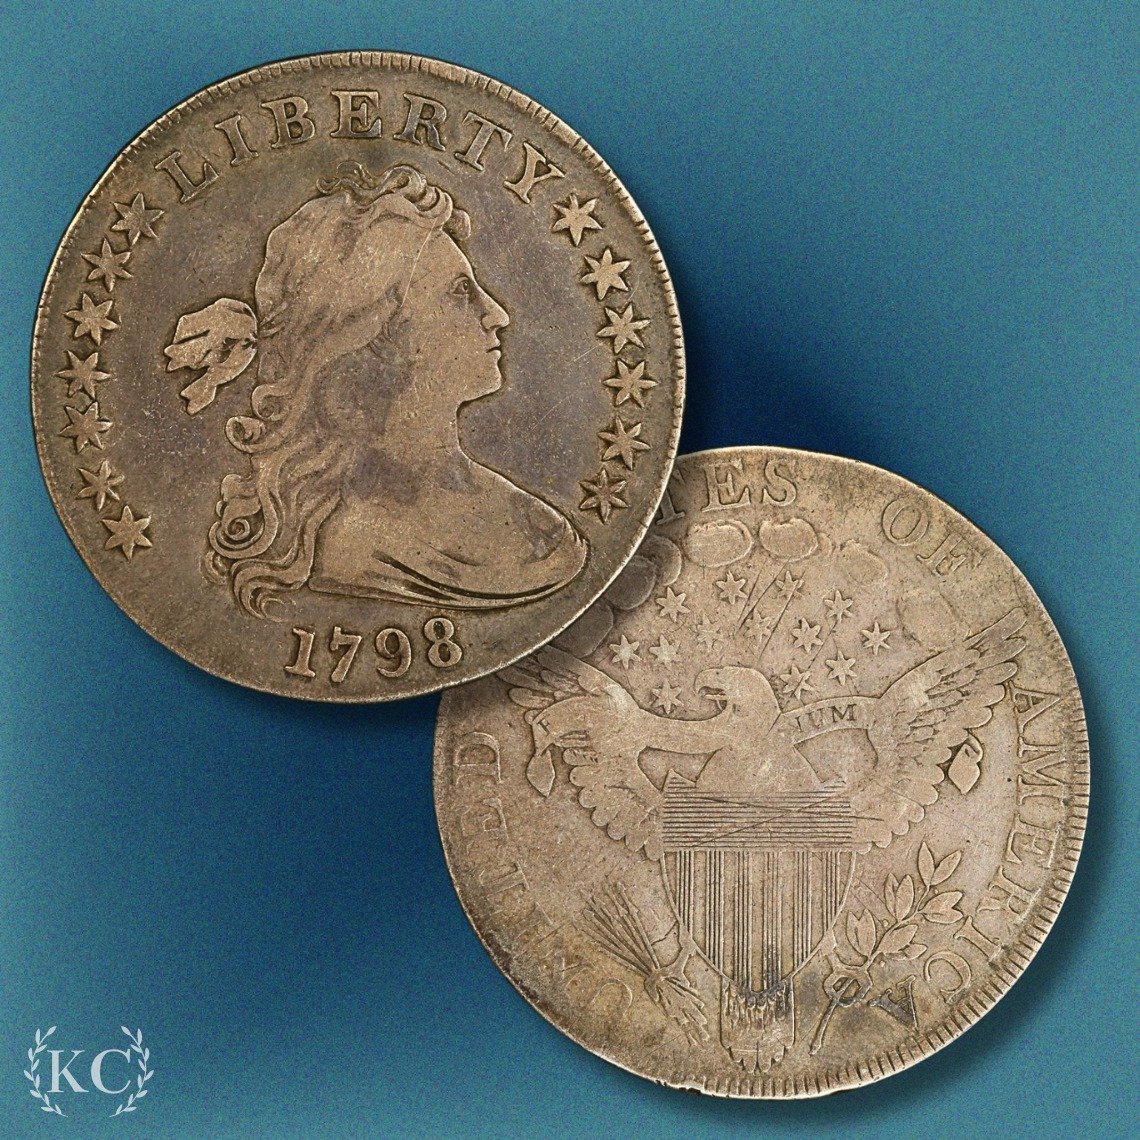 Check out this 1798 Dollar Coin minted just 22 years after the US gained independence! Add a piece of early American history to your collection today!🦅

#America #USA #Coins #PCGS